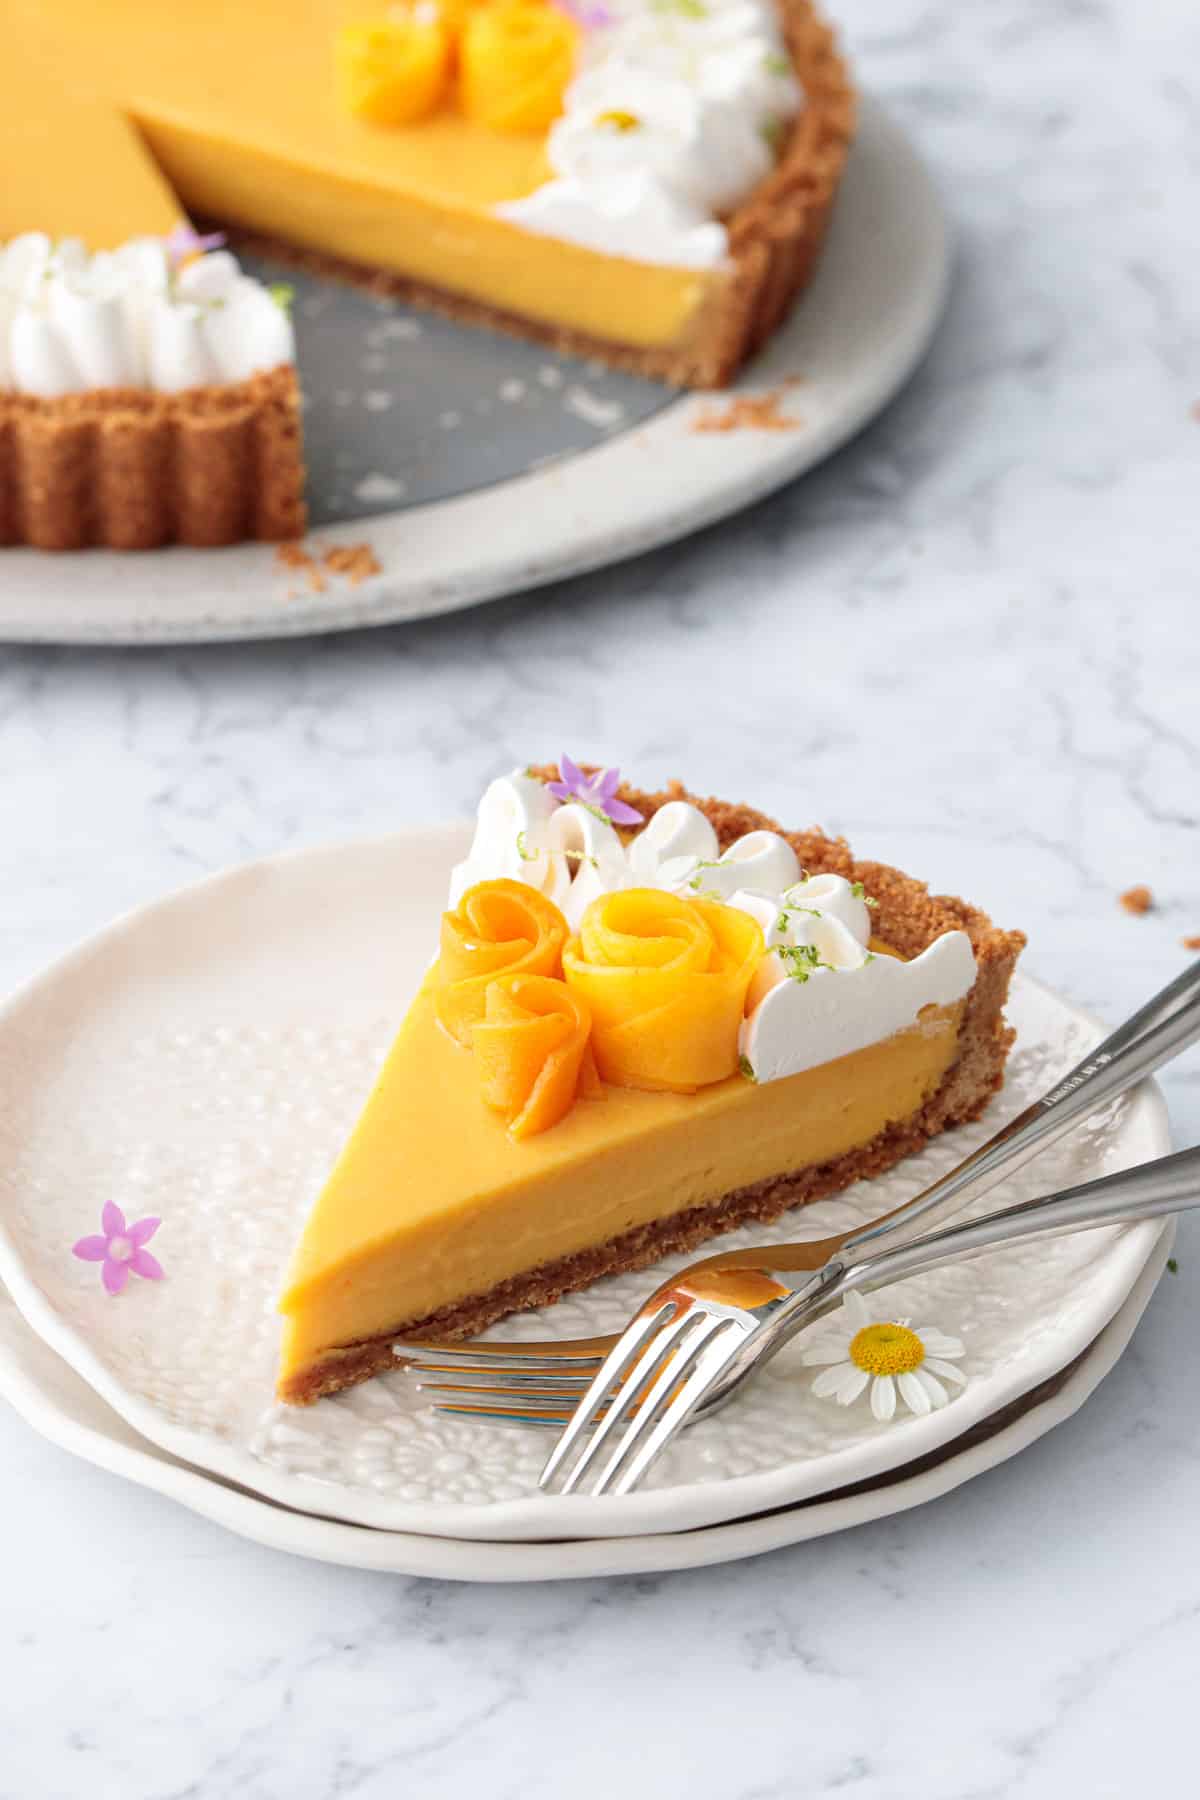 Cut slice of Mango Lime Tart on a white plate with two forks, topped with edible flowers and the rest of the tart in the background.